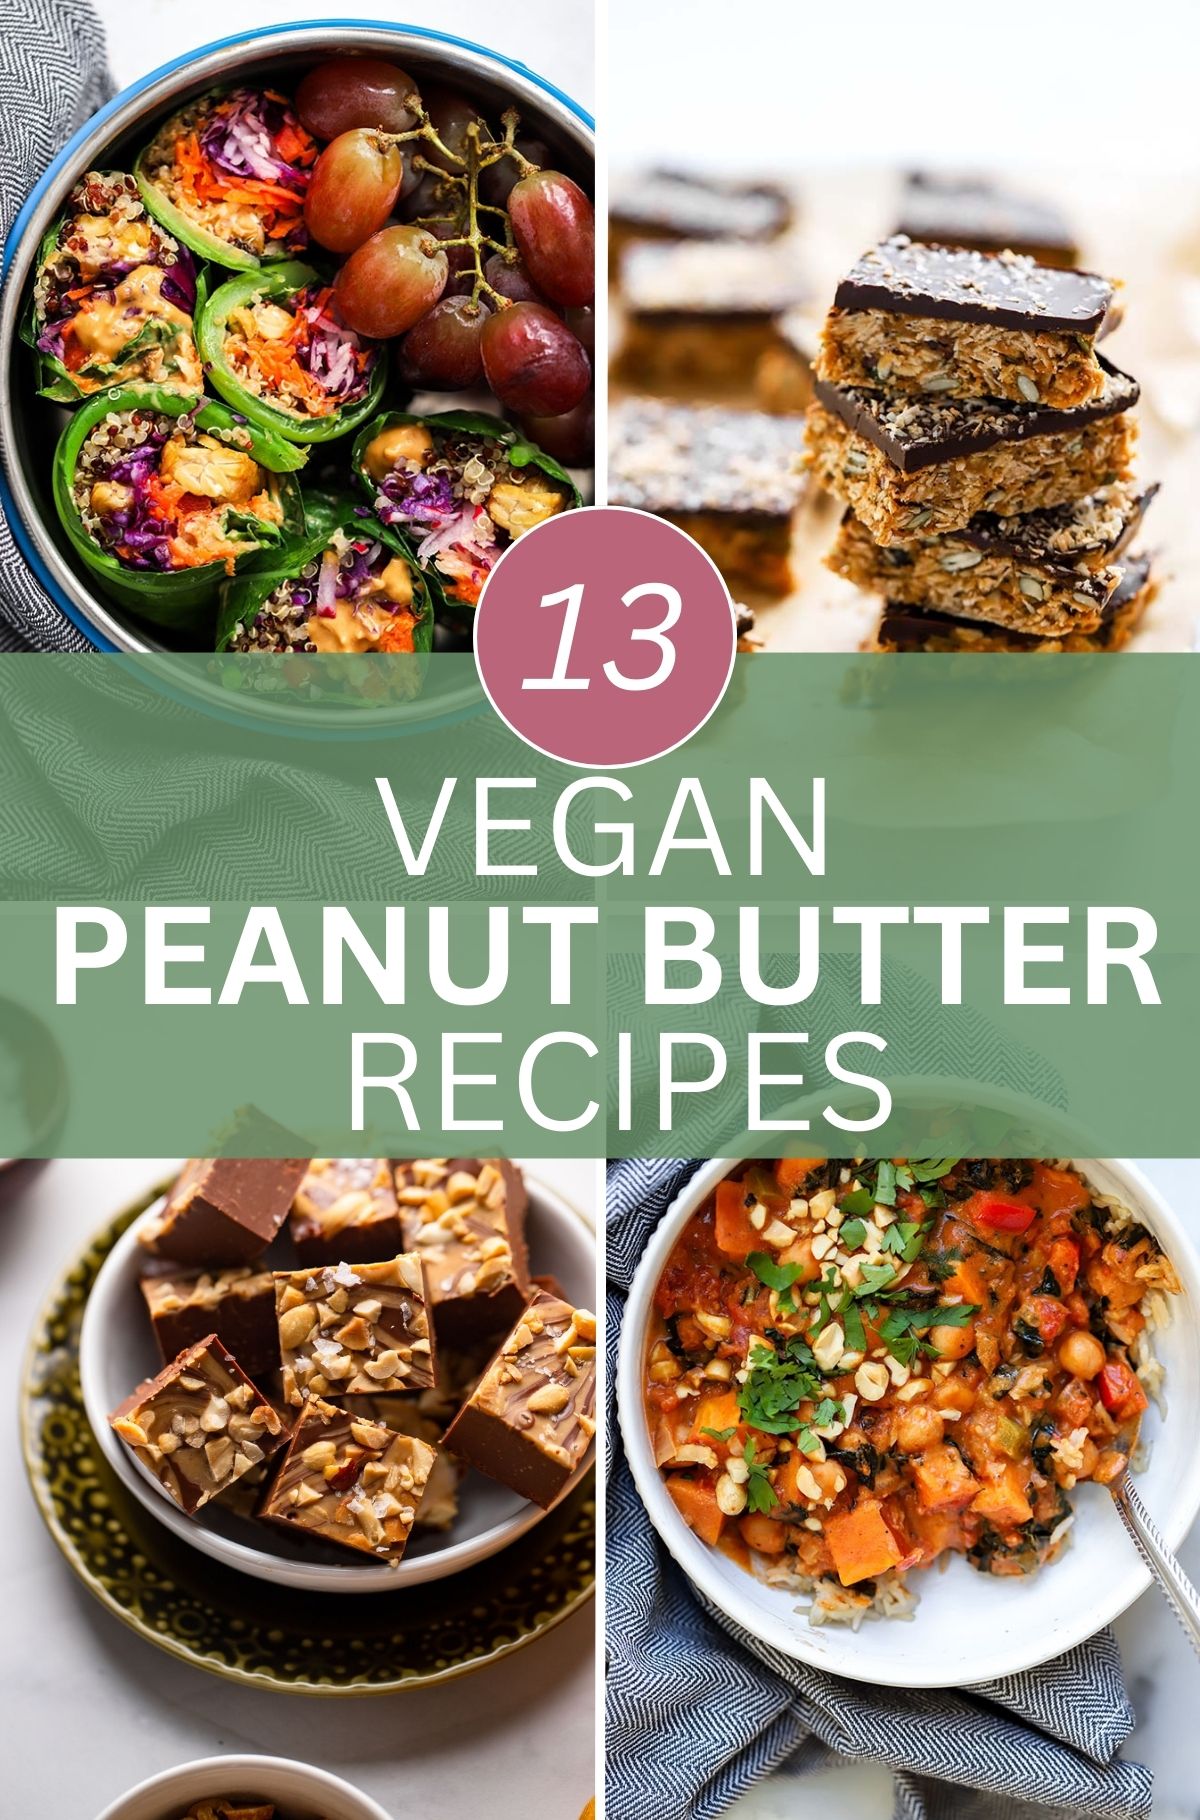 collage of 4 vegan peanut butter recipes with text overlay that says 13 vegan peanut butter recipes